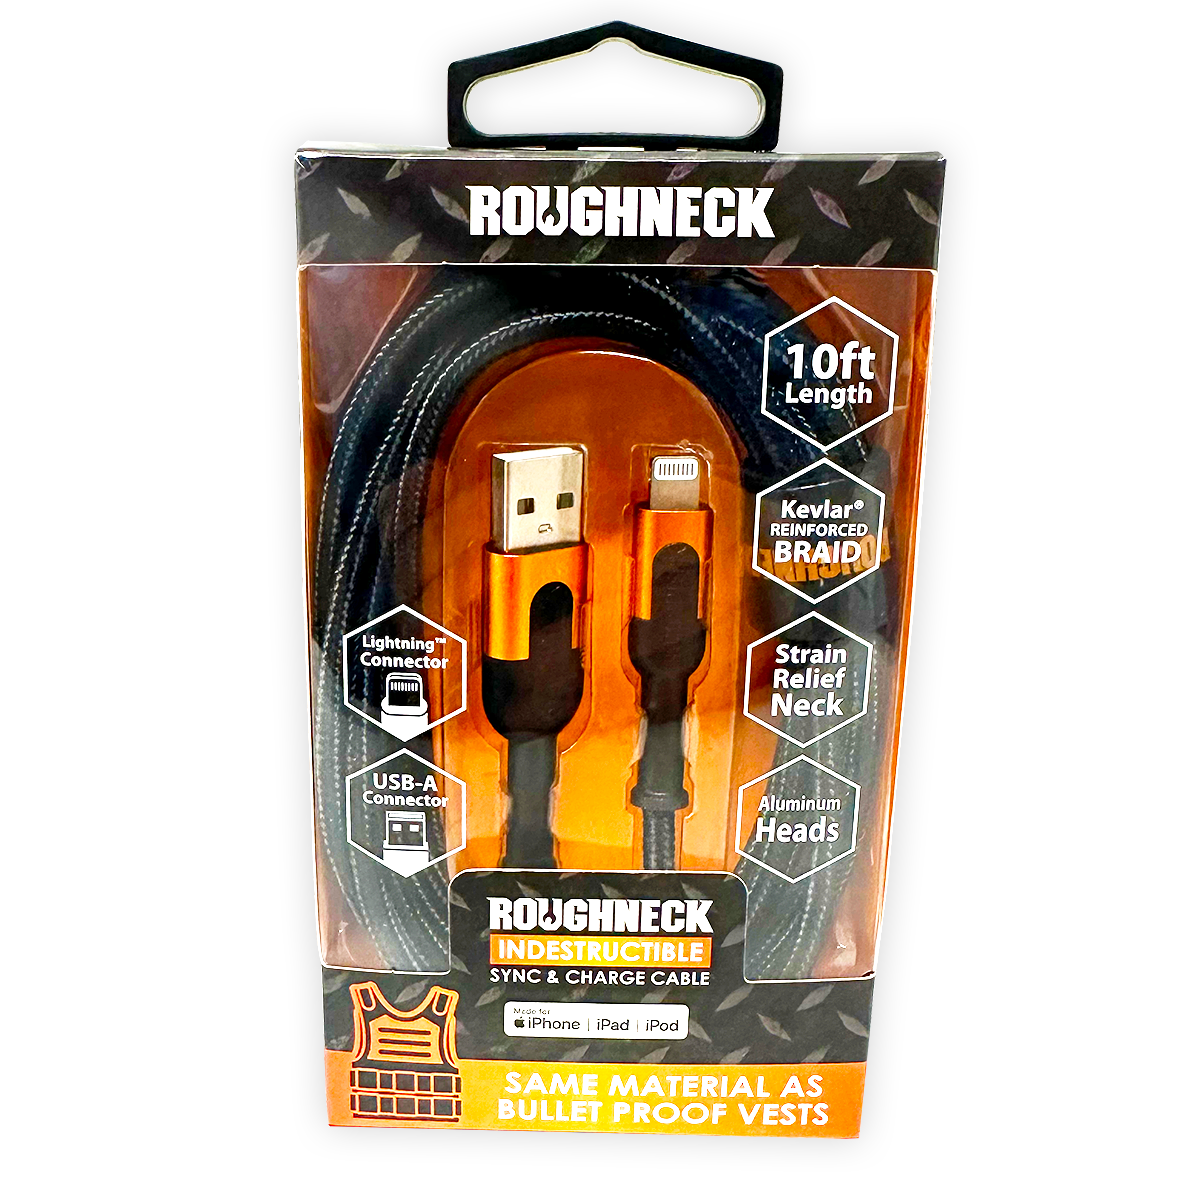 ITEM NUMBER 024569 ROUGHNECK 10FT USB-TO-LIGHTNING CABLE 3 PIECES PER DISPLAY